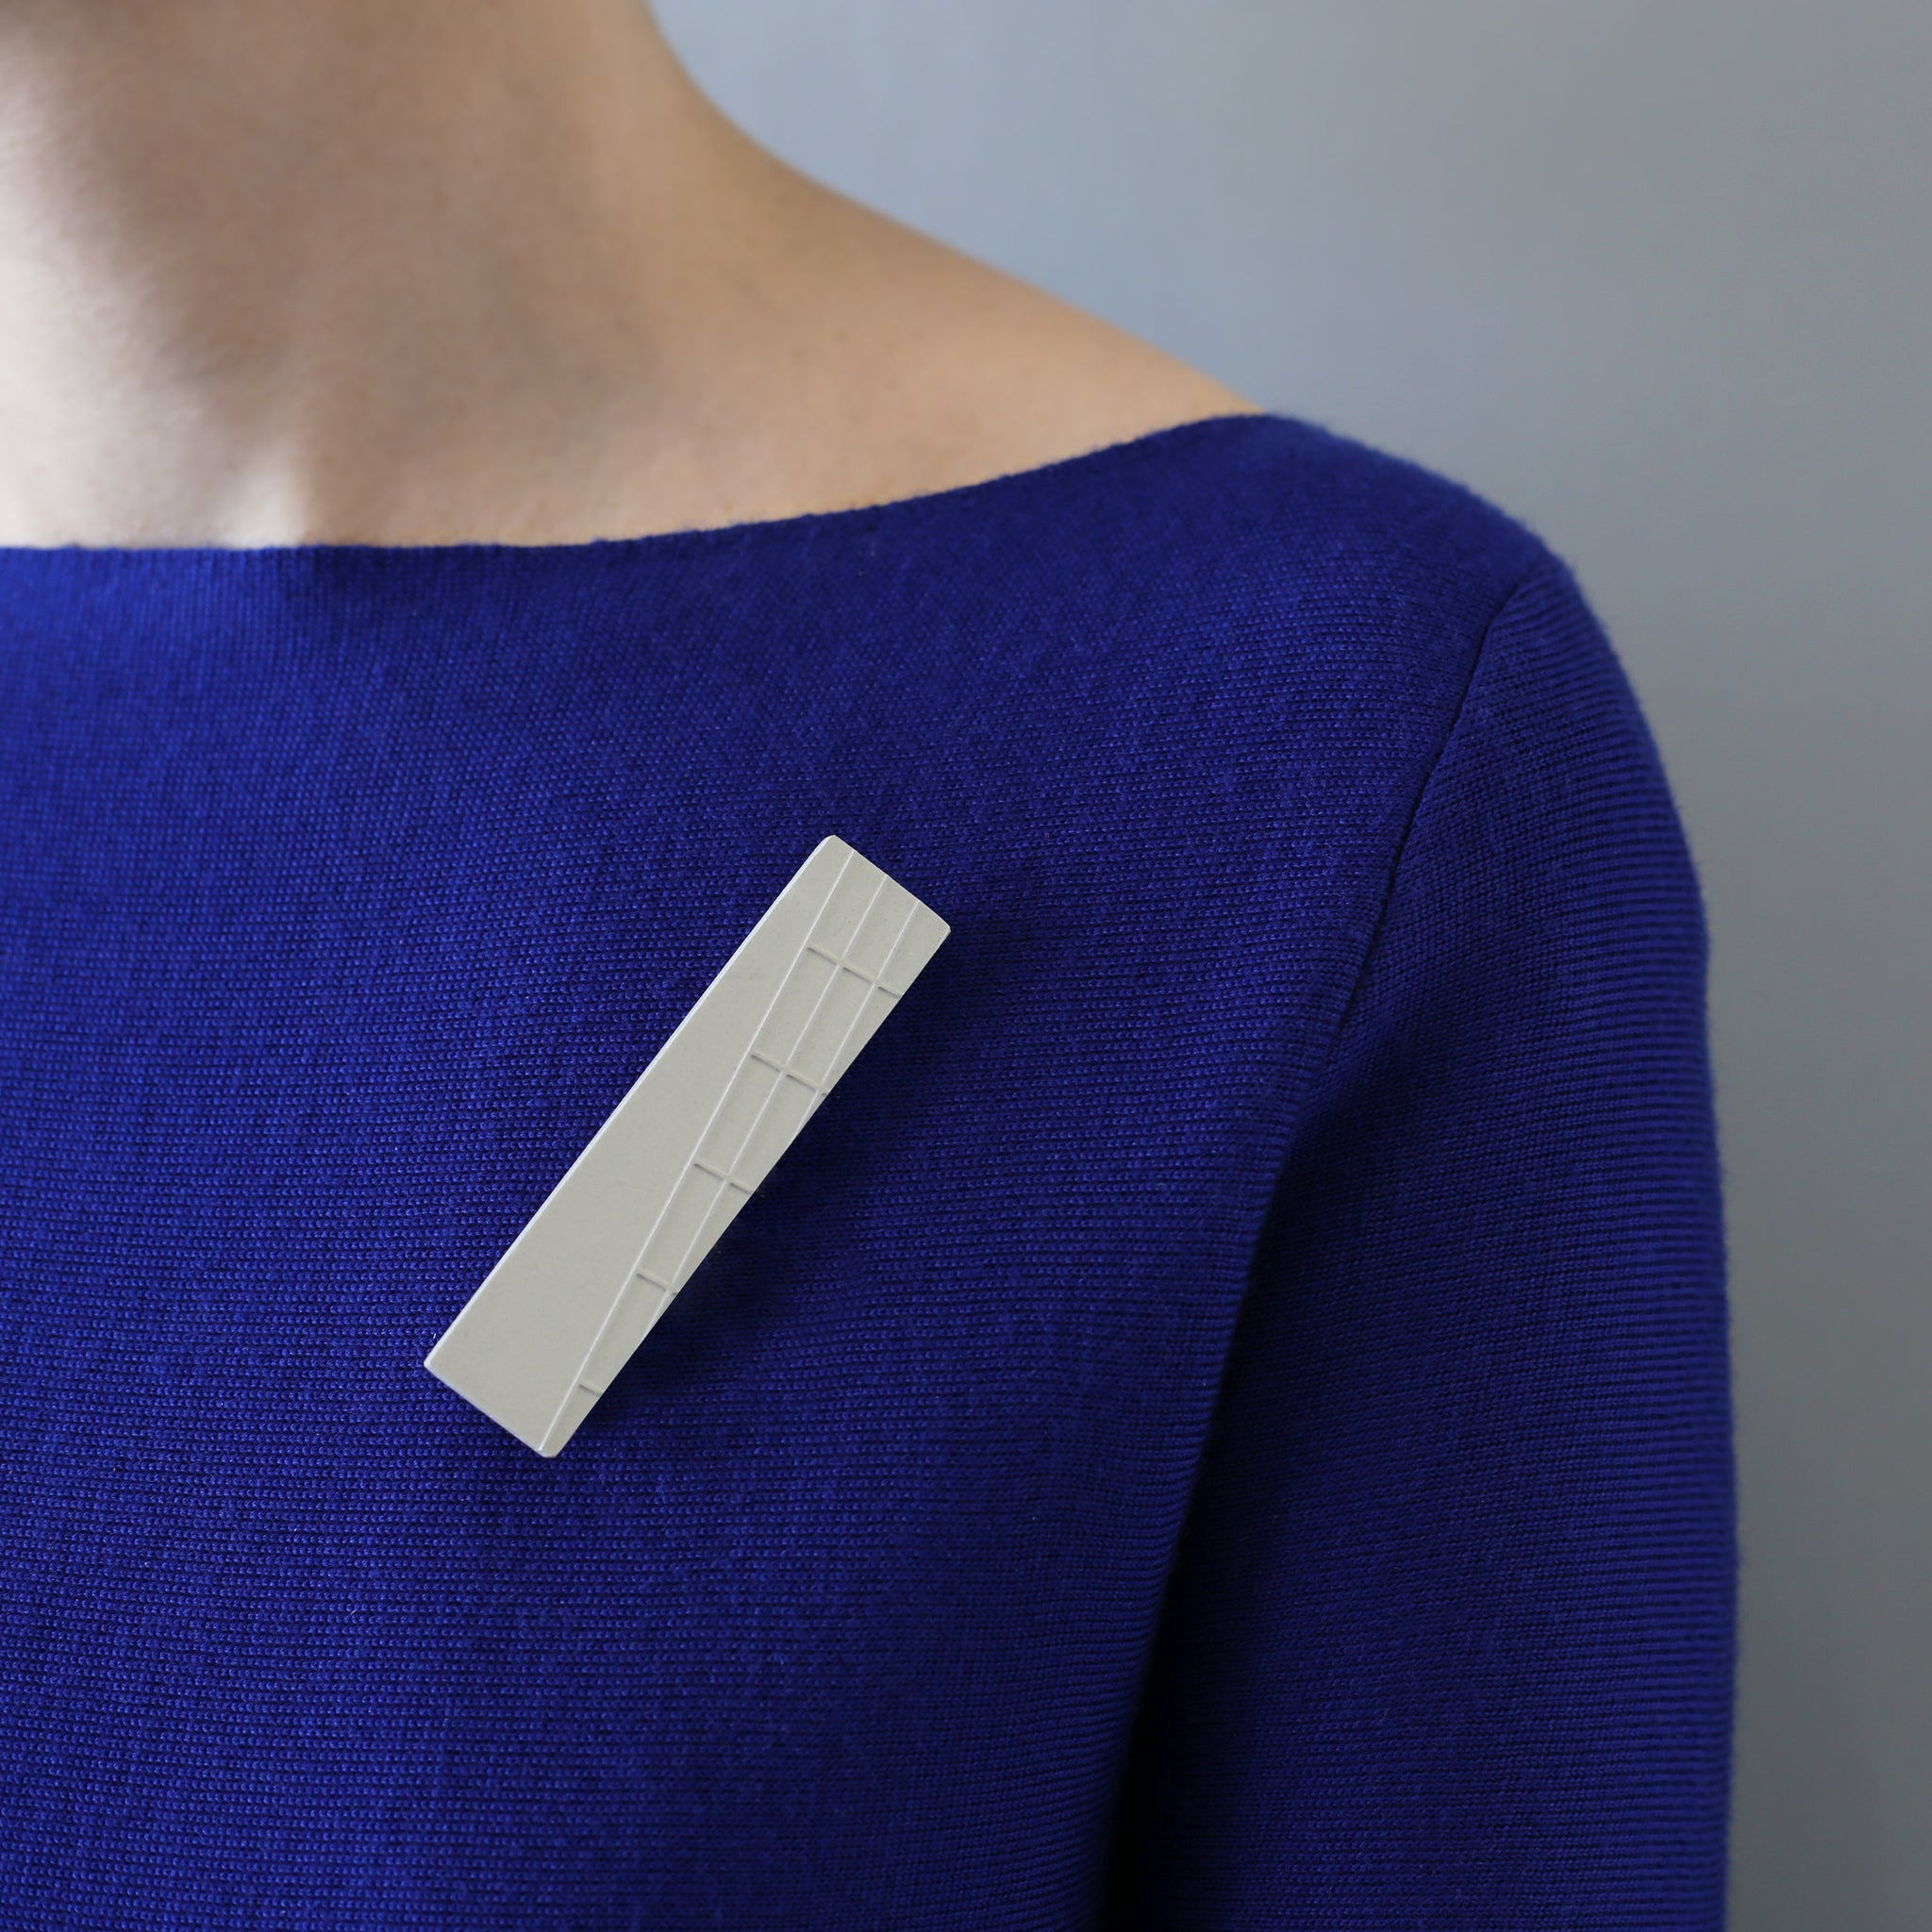 Handcast brooch inspired by the brutalist architecture of London's Barbican centre. This rectangular brooch has a raised grid pattern on part of the surface. Each brooch is cast by hand in our south London studio and comes in branded gift box. Dimensions: 8cm x 2cm